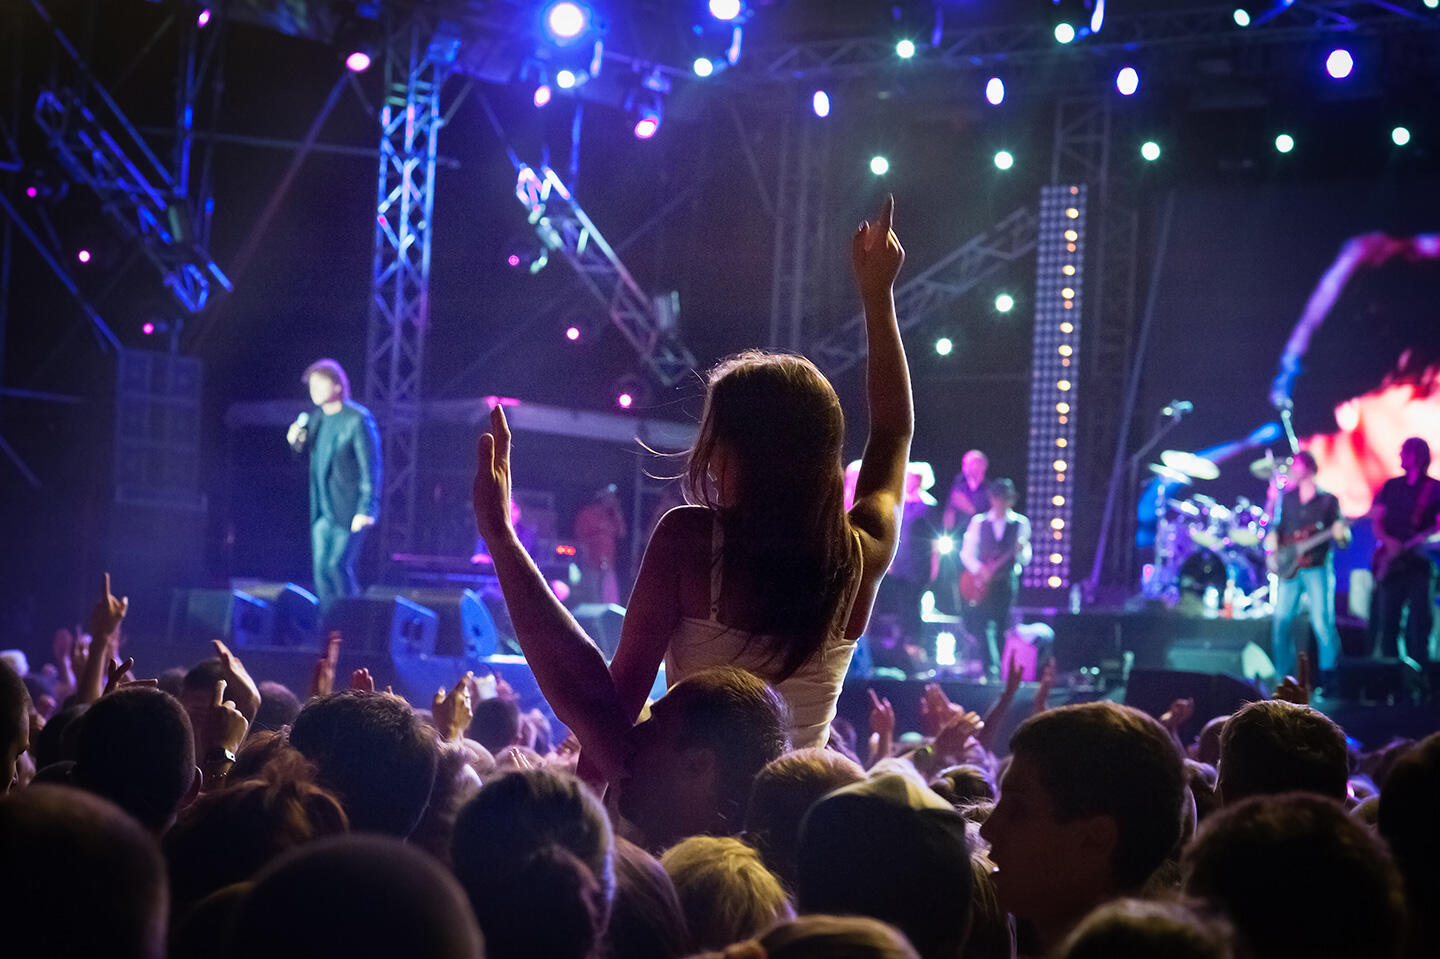 Enthusiastic spectator on the shoulders of a festival-goer at the Francofolies festival in La Rochelle, with the concert stage in the background.